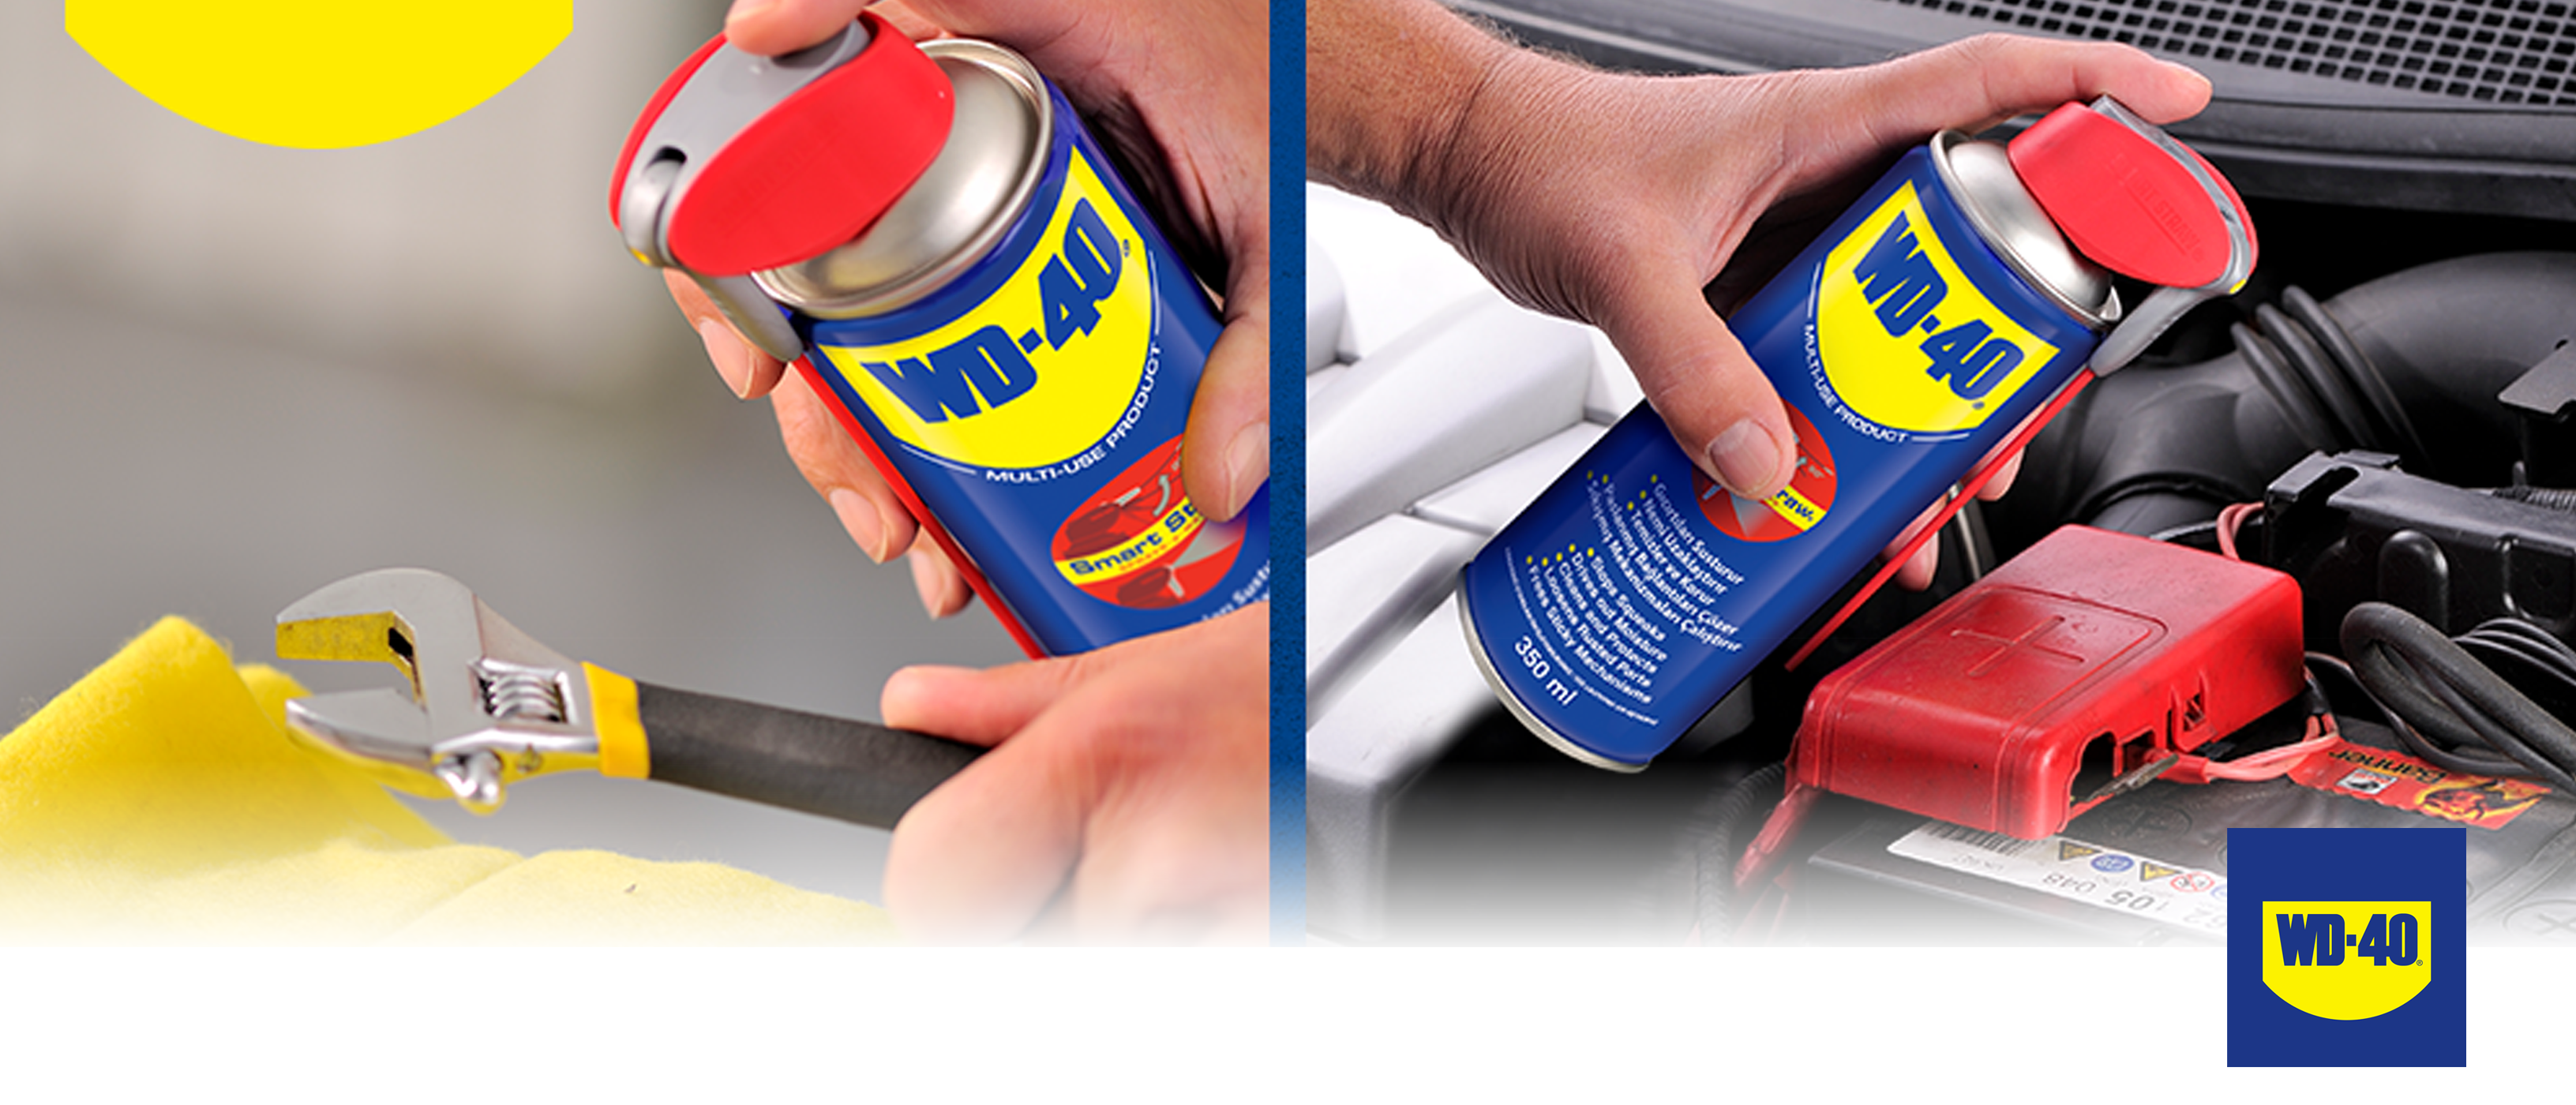 wd 40.png (3.76 MB)